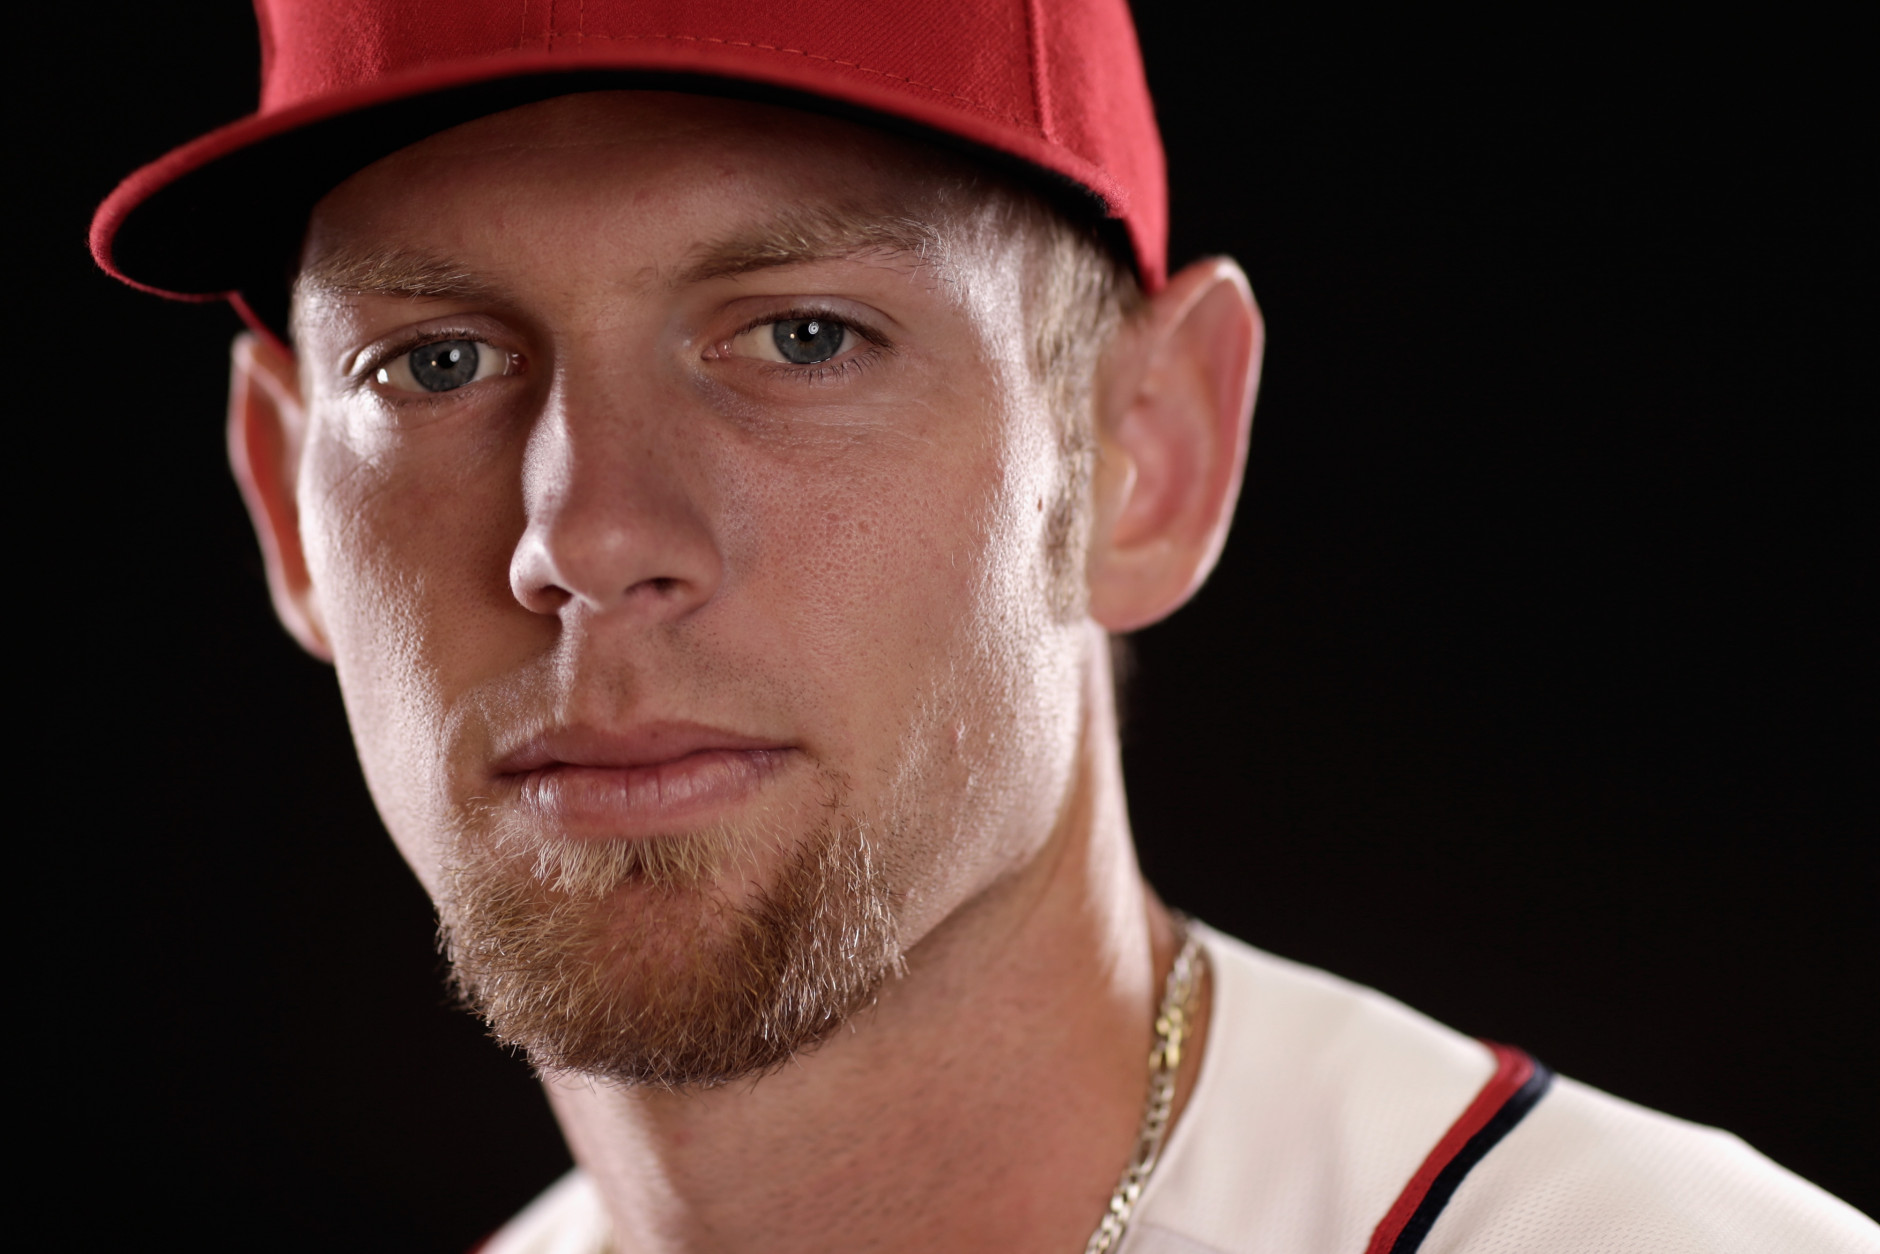 VIERA, FL - MARCH 01:  Stephen Strasburg #37 of the Washington Nationals poses for a portrait during photo day at Space Coast Stadium on March 1, 2015 in Viera, Florida.  (Photo by Chris Trotman/Getty Images)